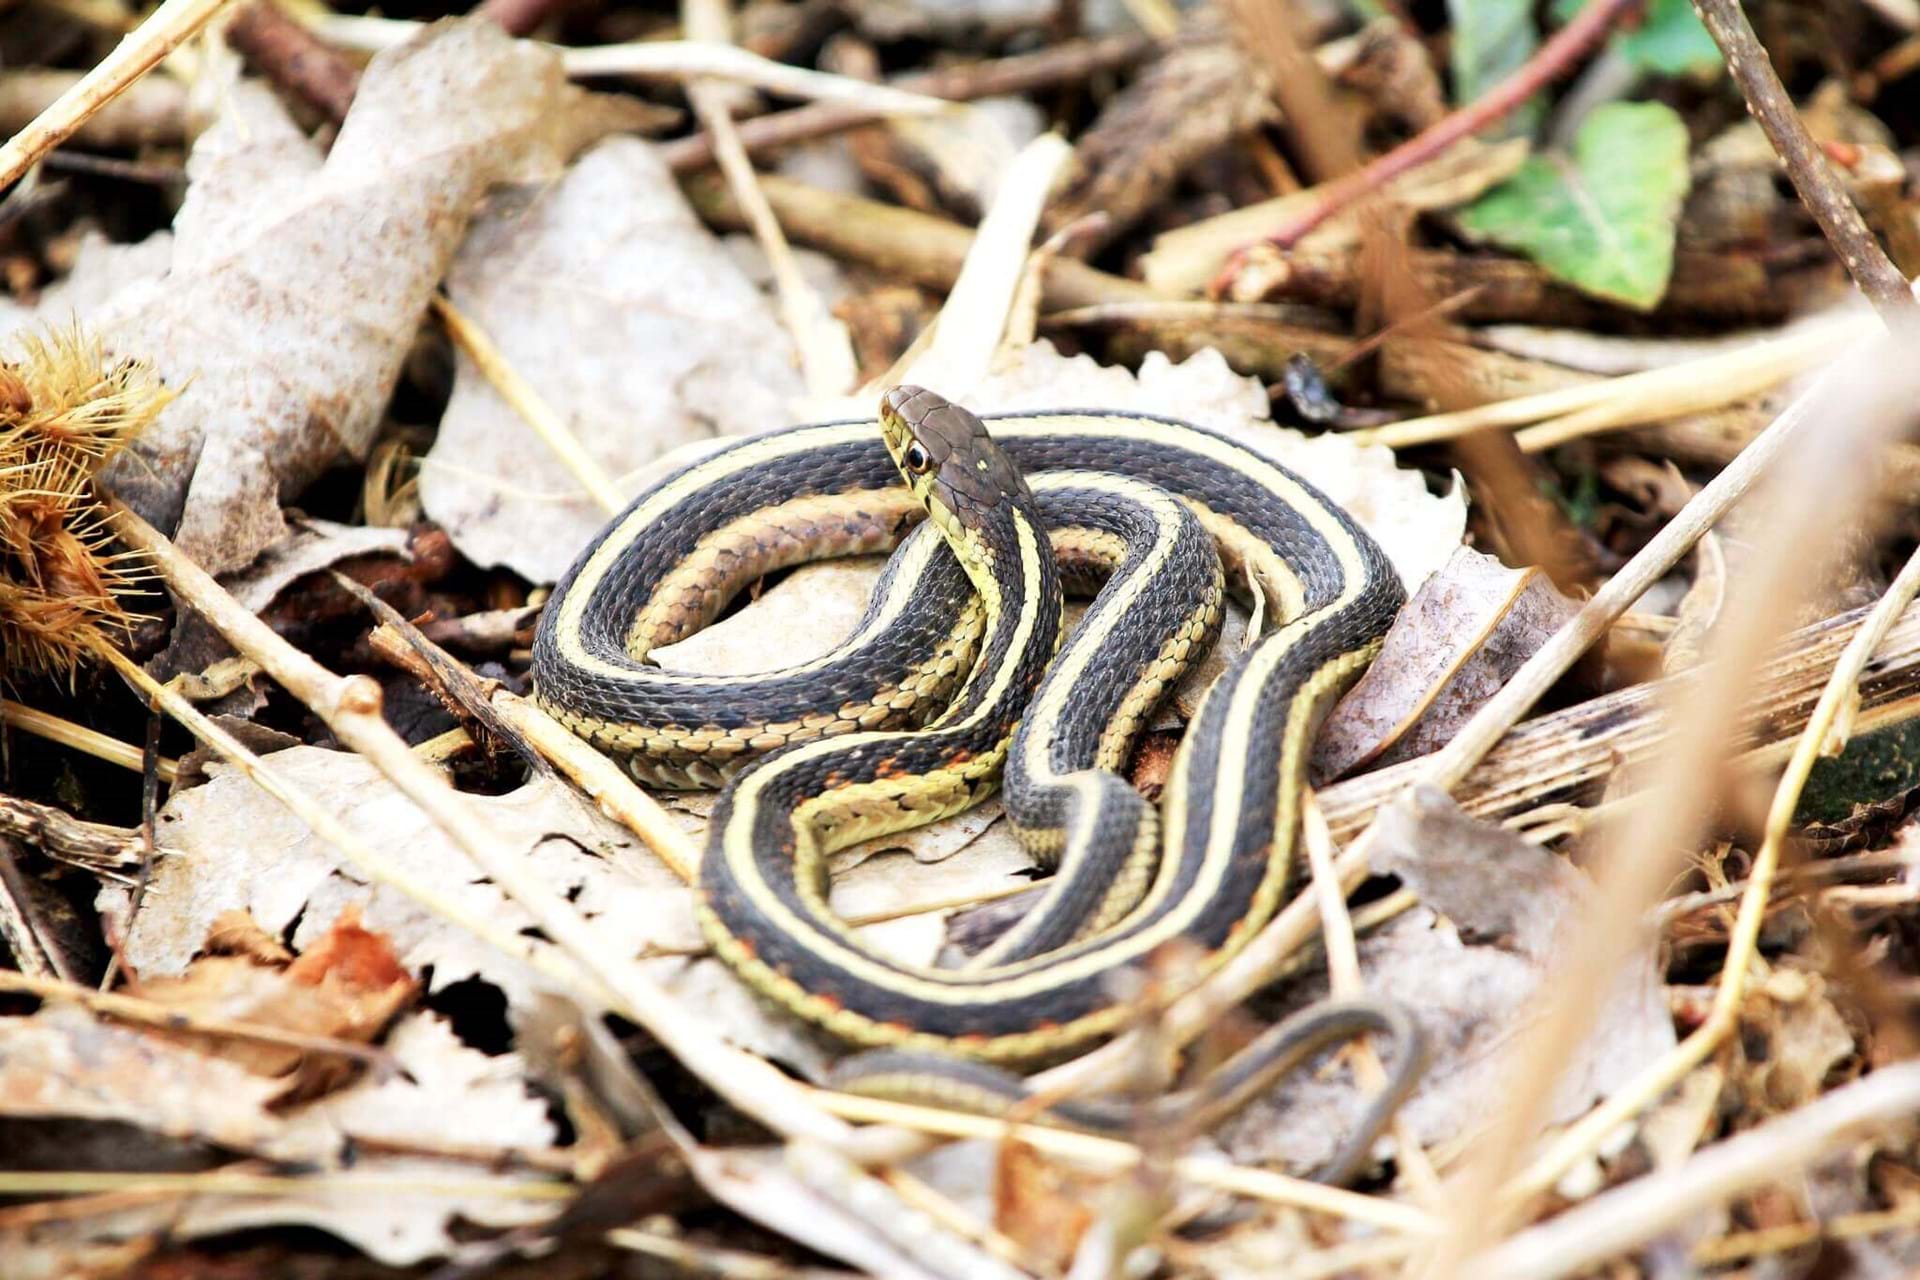 A snake laying on top of some leaves